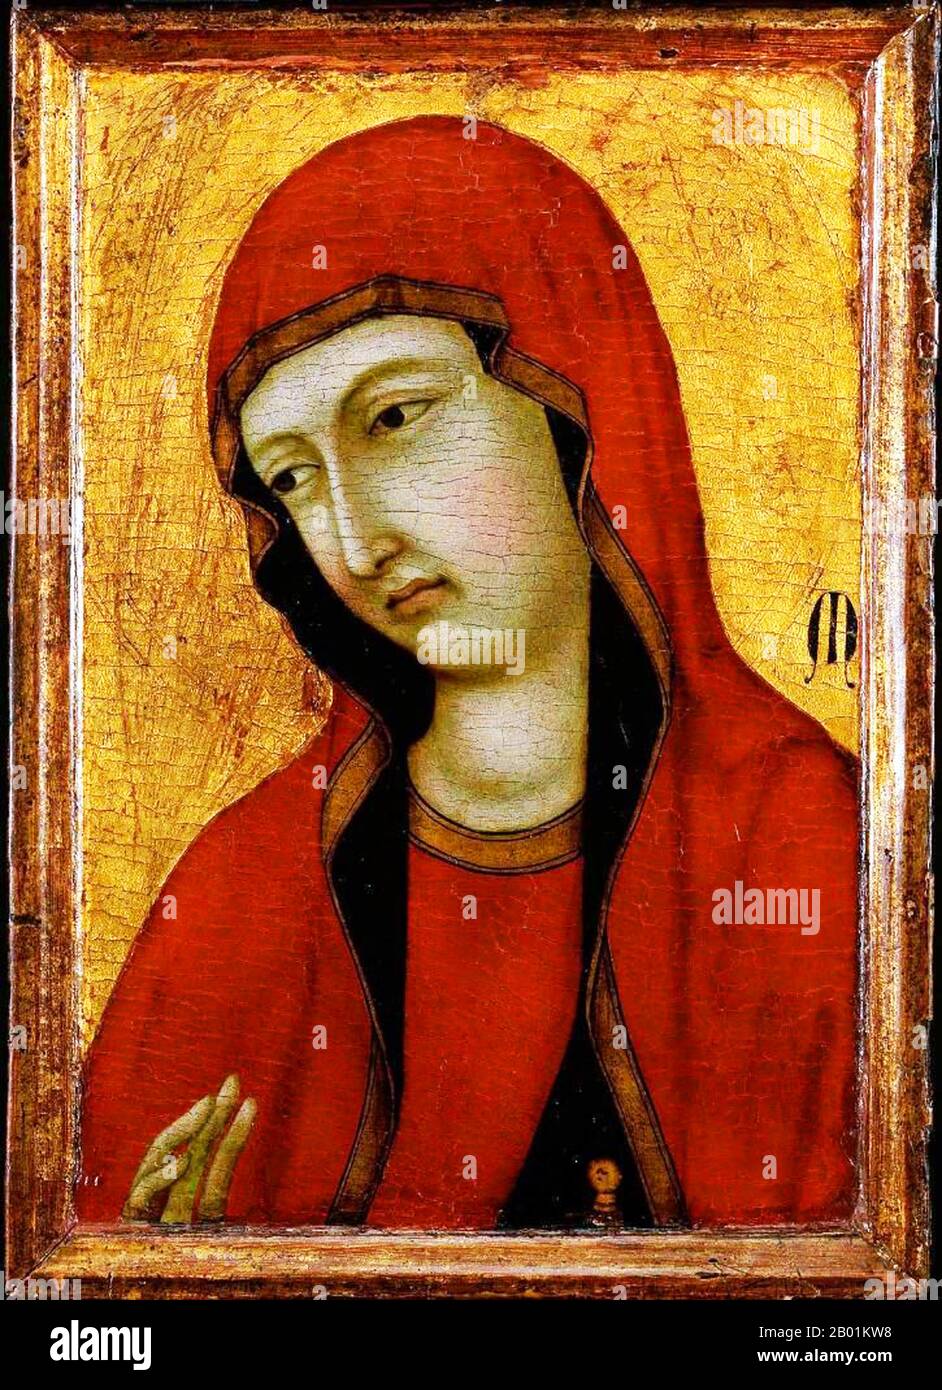 Italy: 'St. Mary Magdalen'. Tempera on panel painting by Ugolino di Nerio (c. 1280-1349), c. 1320.  Mary Magdalene was one of Jesus' most celebrated disciples, and the most important woman disciple in the movement of Jesus. Jesus cleansed her of 'seven demons', [Luke 8:2] [Mark 16:9] conventionally interpreted as referring to complex illnesses. She became most prominent during his last days, being present at the cross after the male disciples (excepting John the Beloved) had fled, and at his burial. She was the first person to see Jesus after his Resurrection. Stock Photo